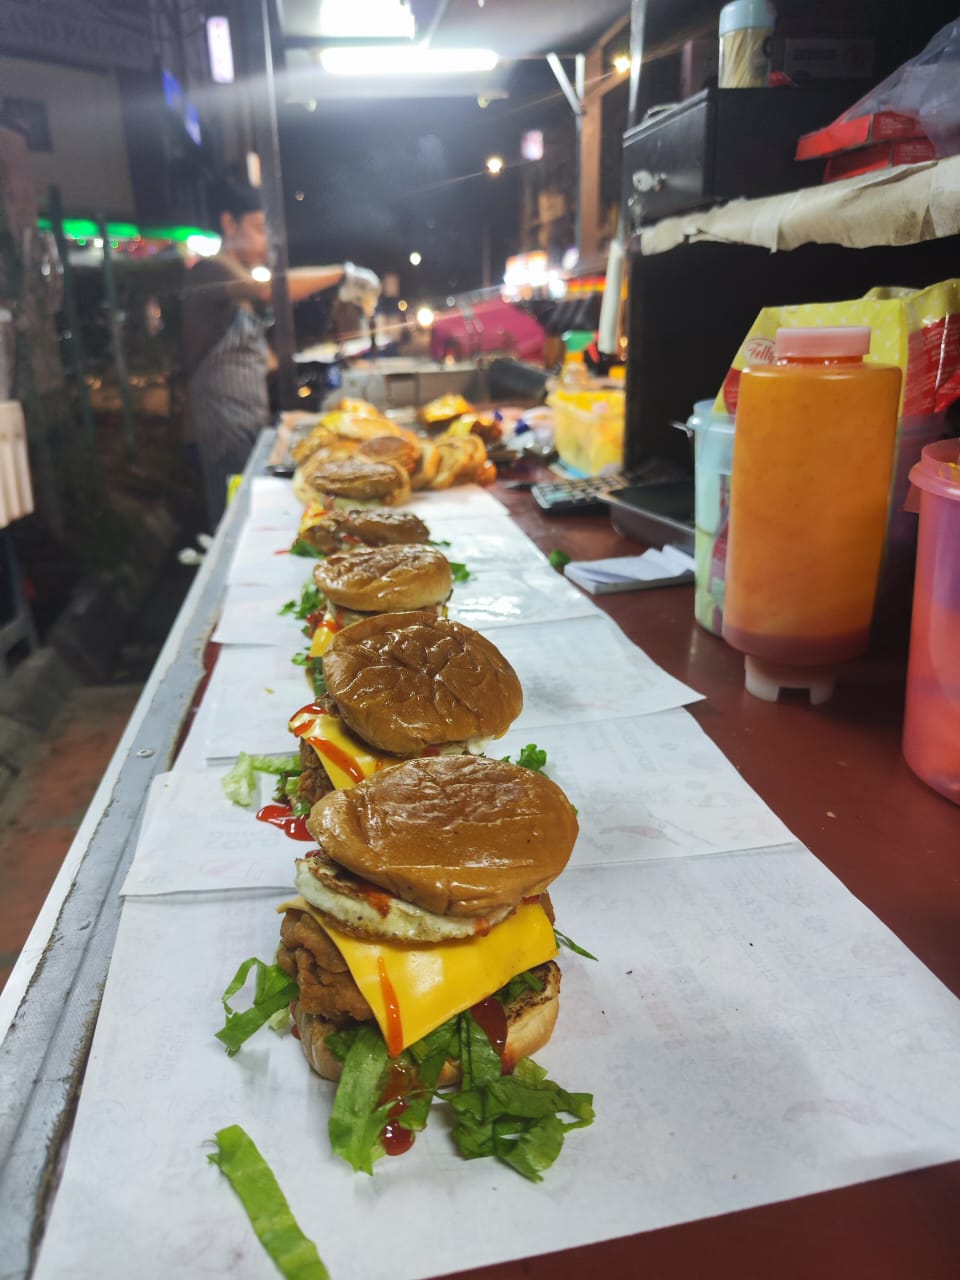 Burgers that been made for customers